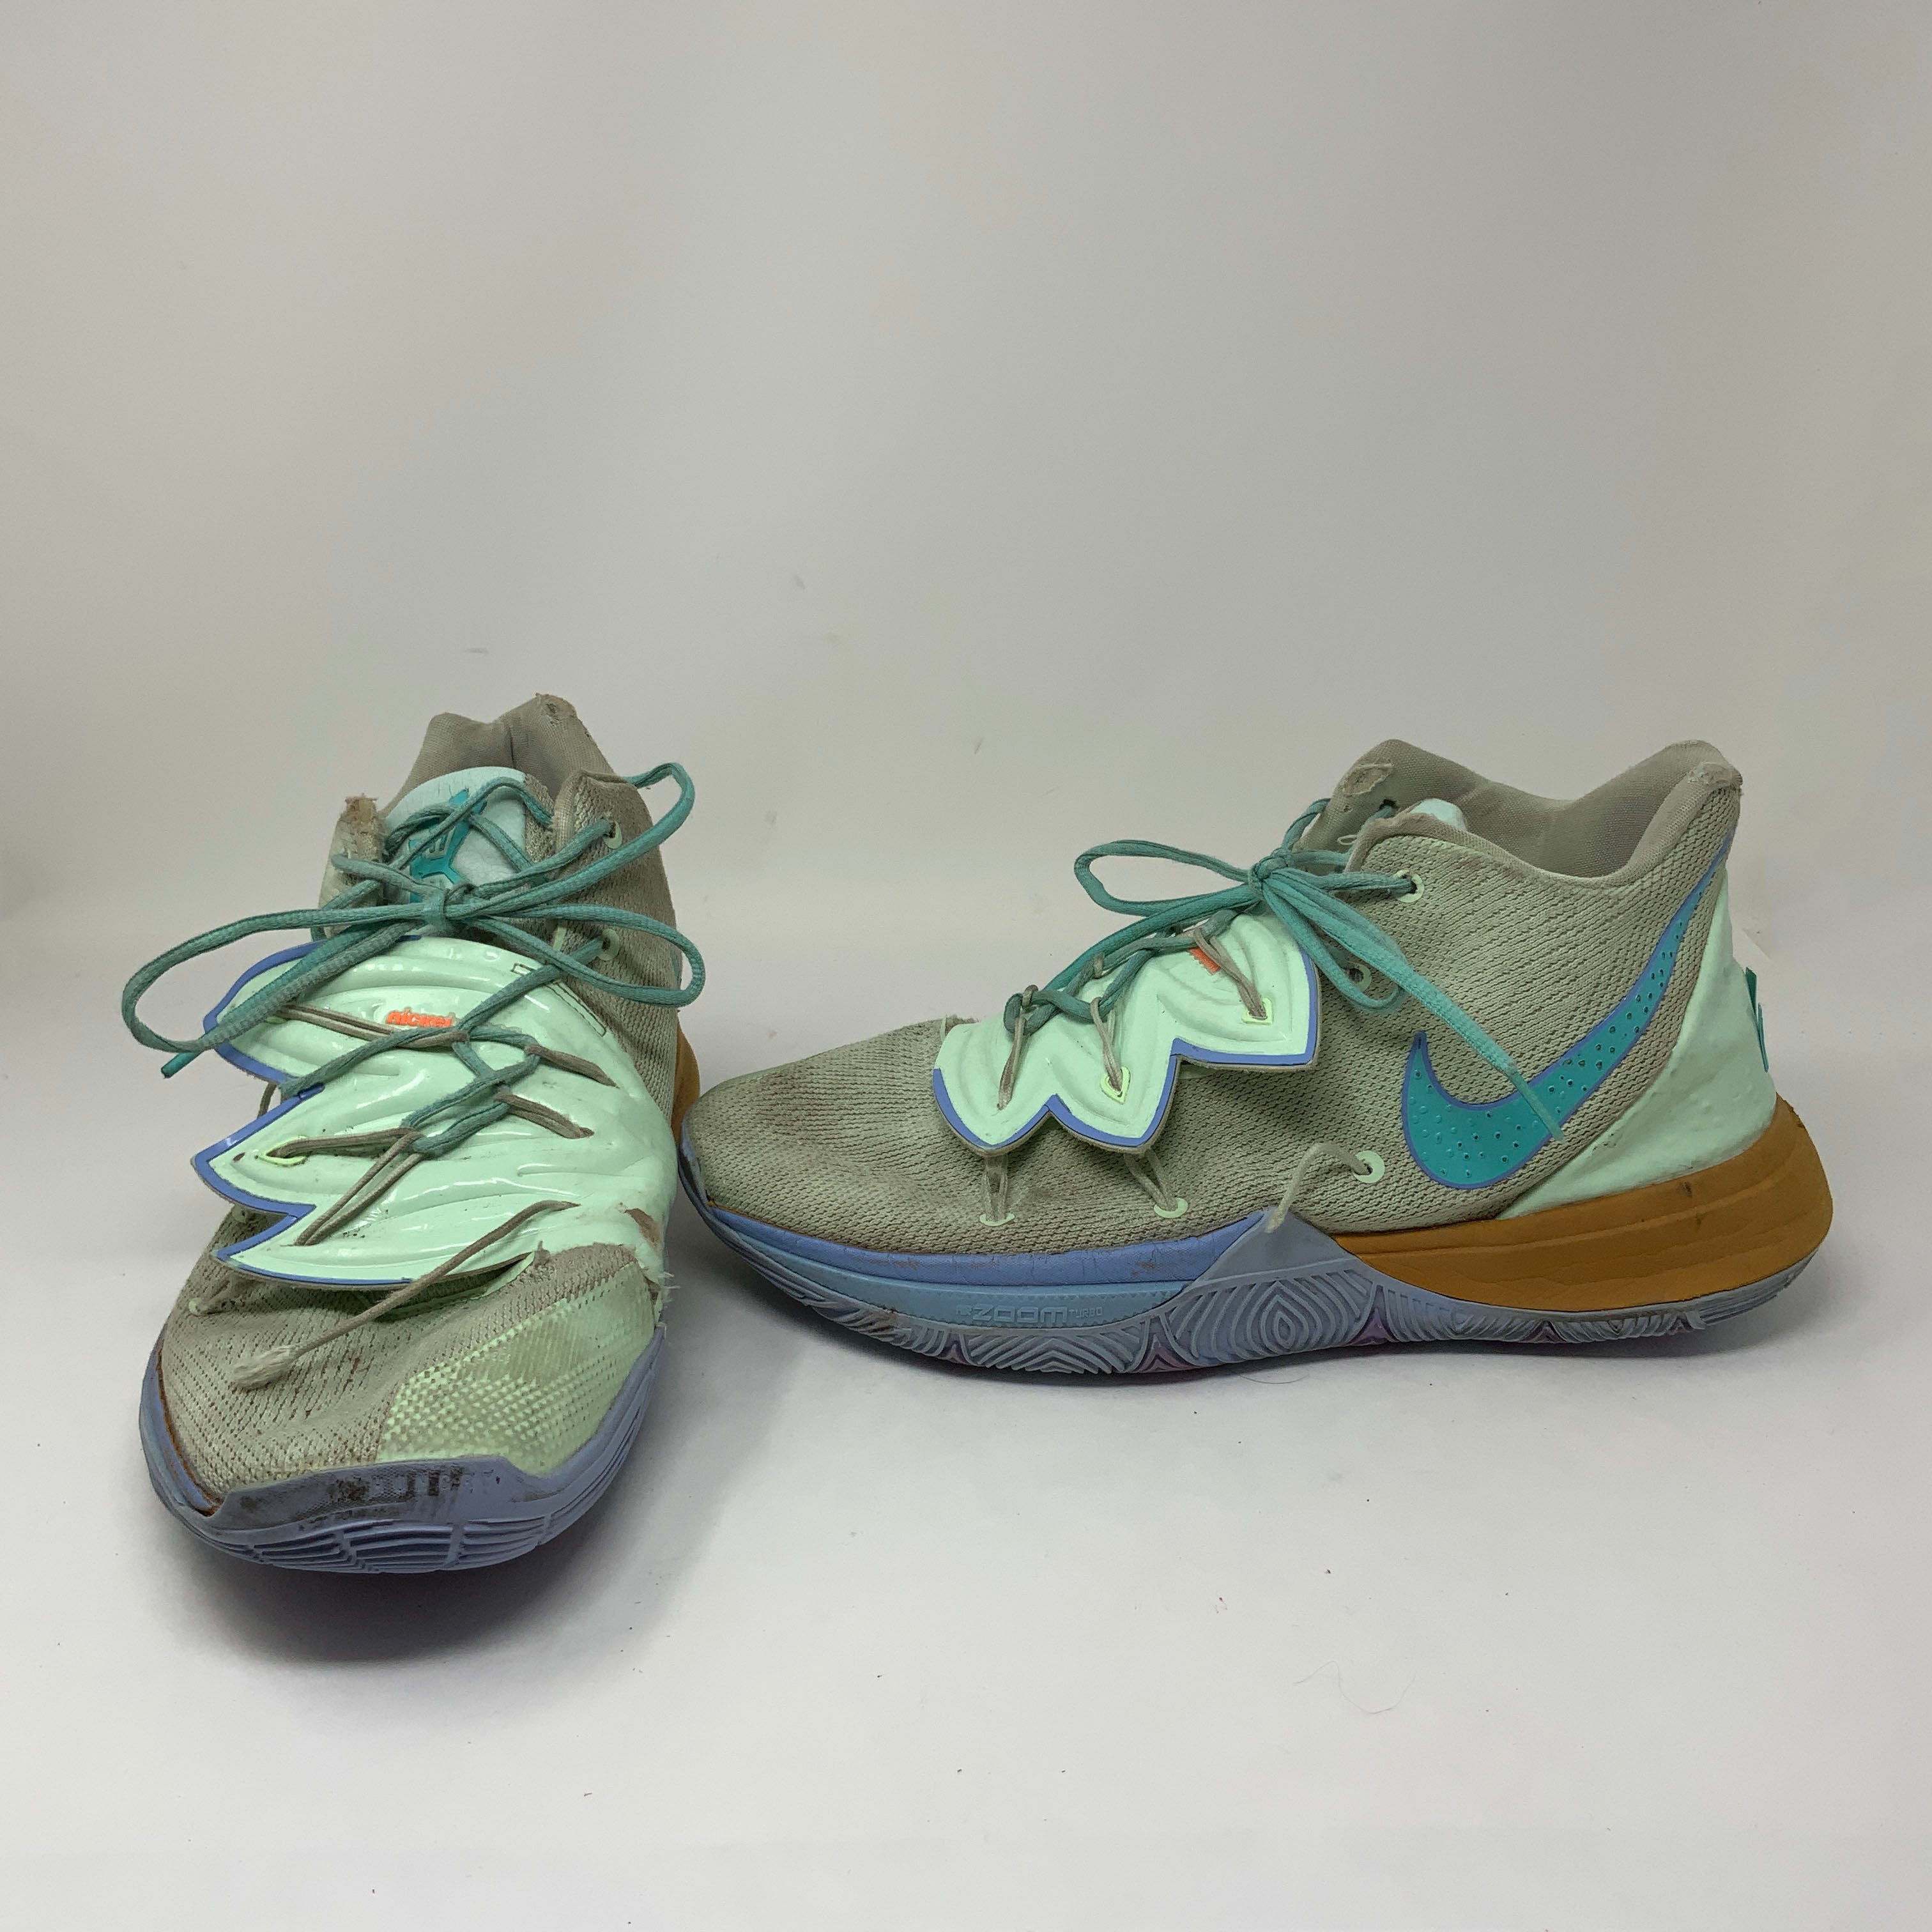 Nike Kyrie Irving Spongebob Squidward Collectible Sneake – Consignment